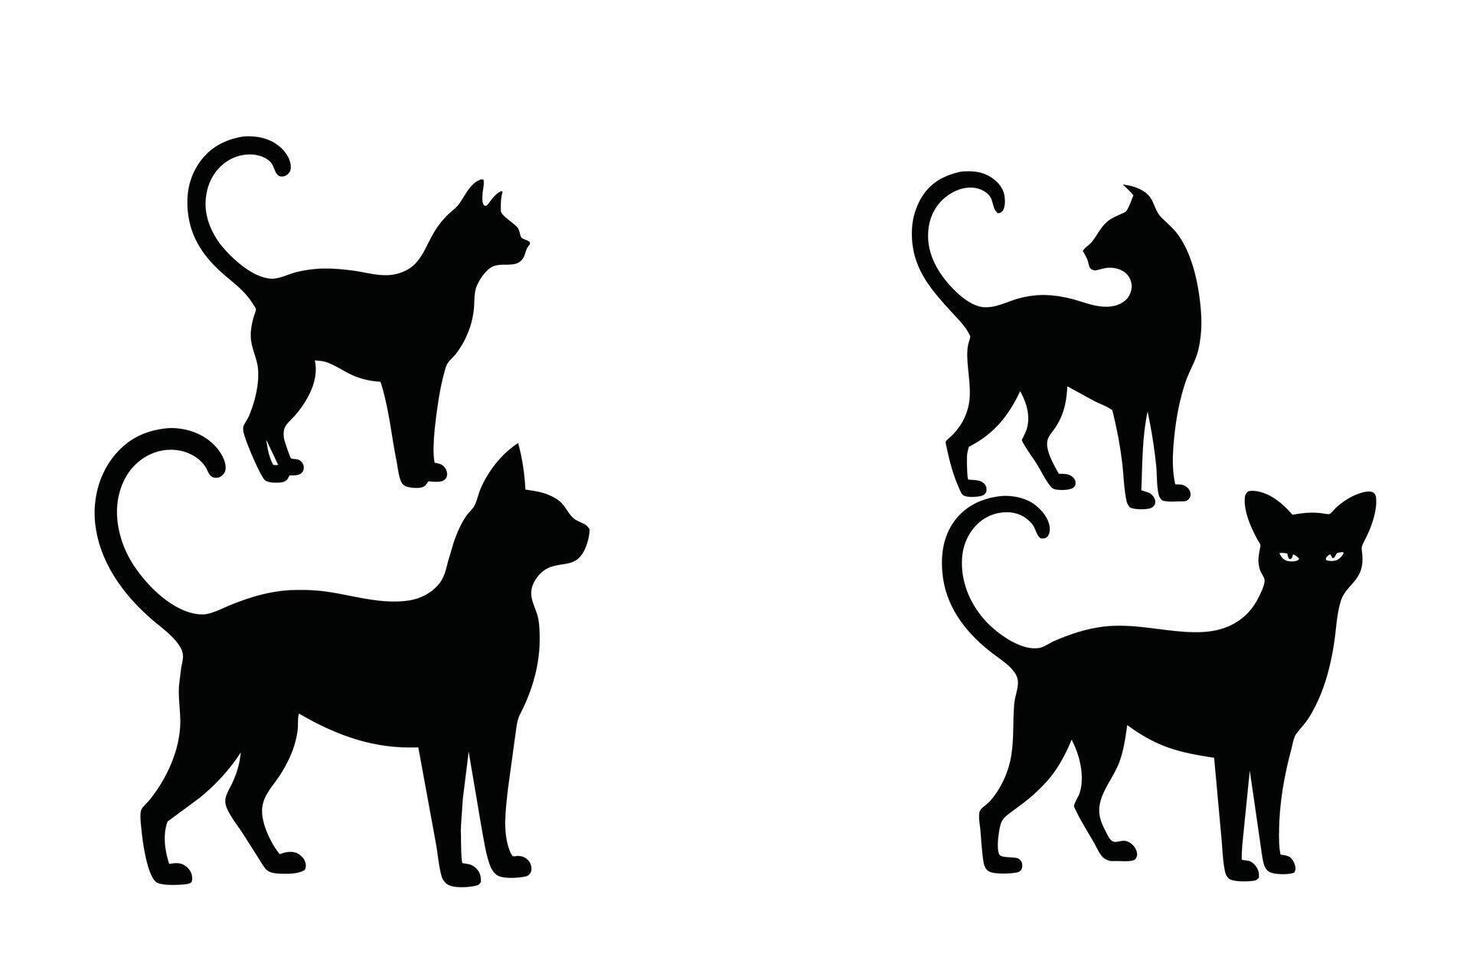 Cat silhouettes collection isolated on white background vector